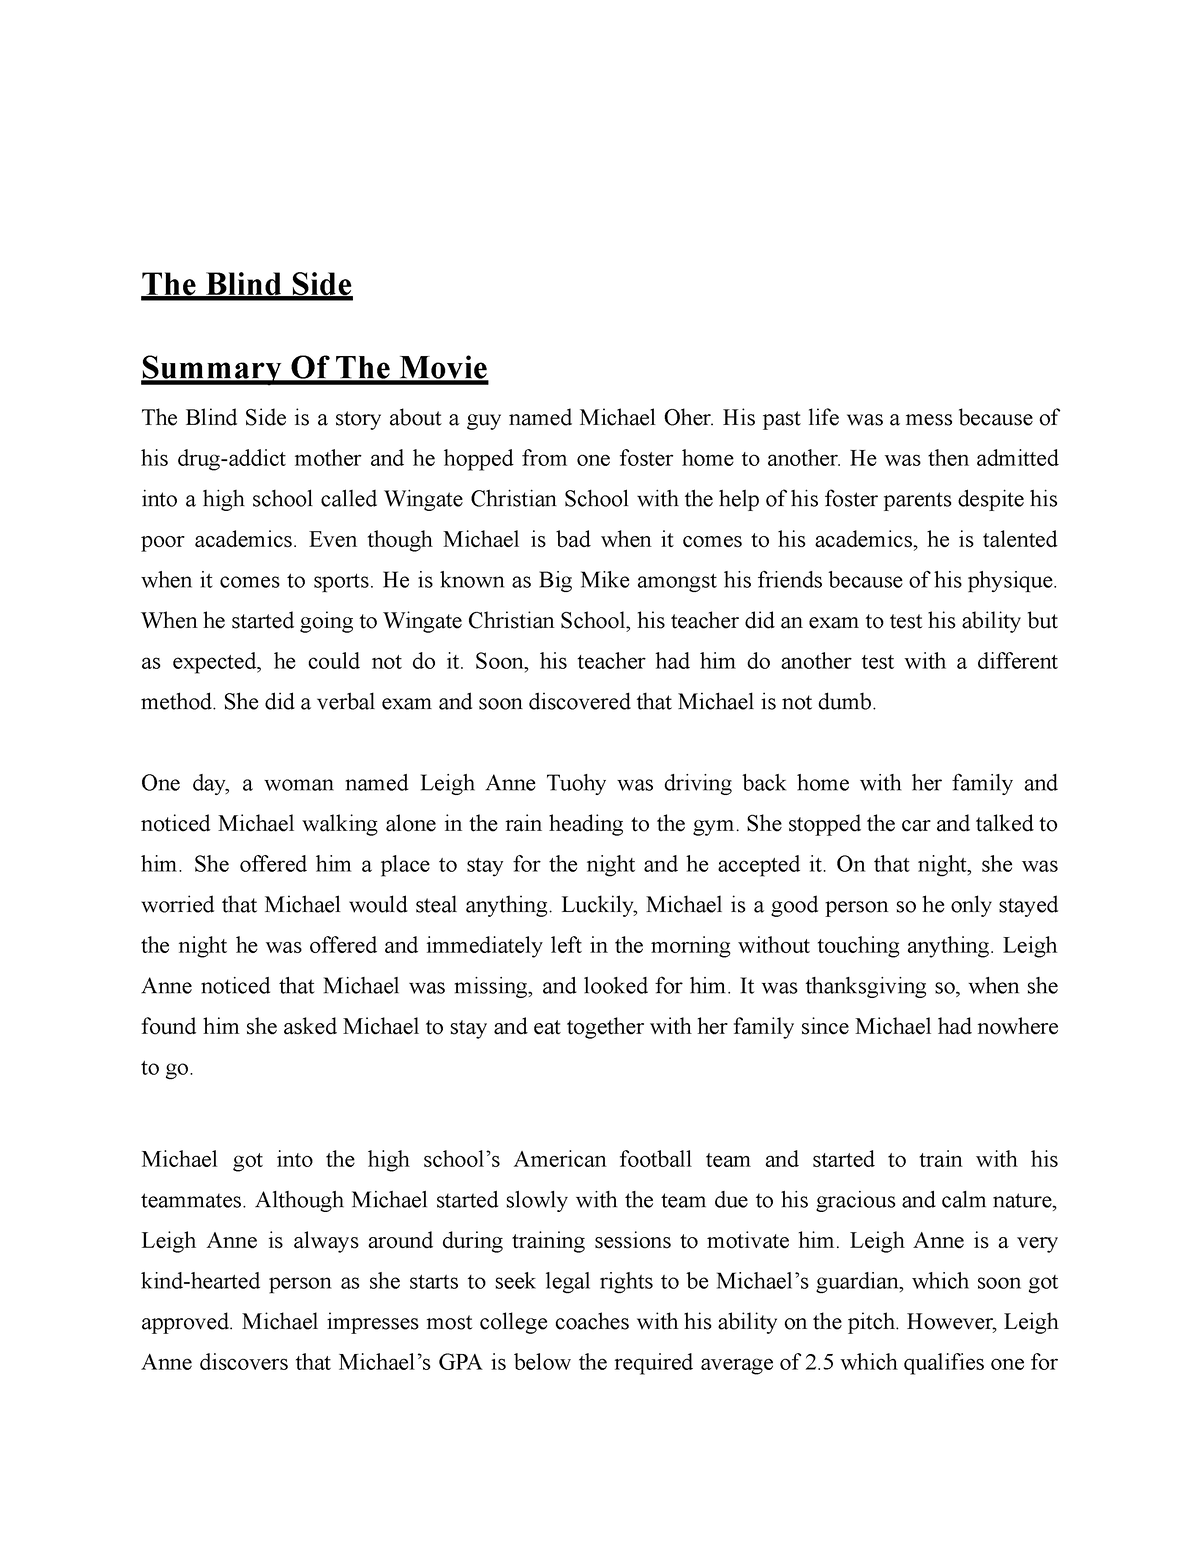 essay about movie the blind side